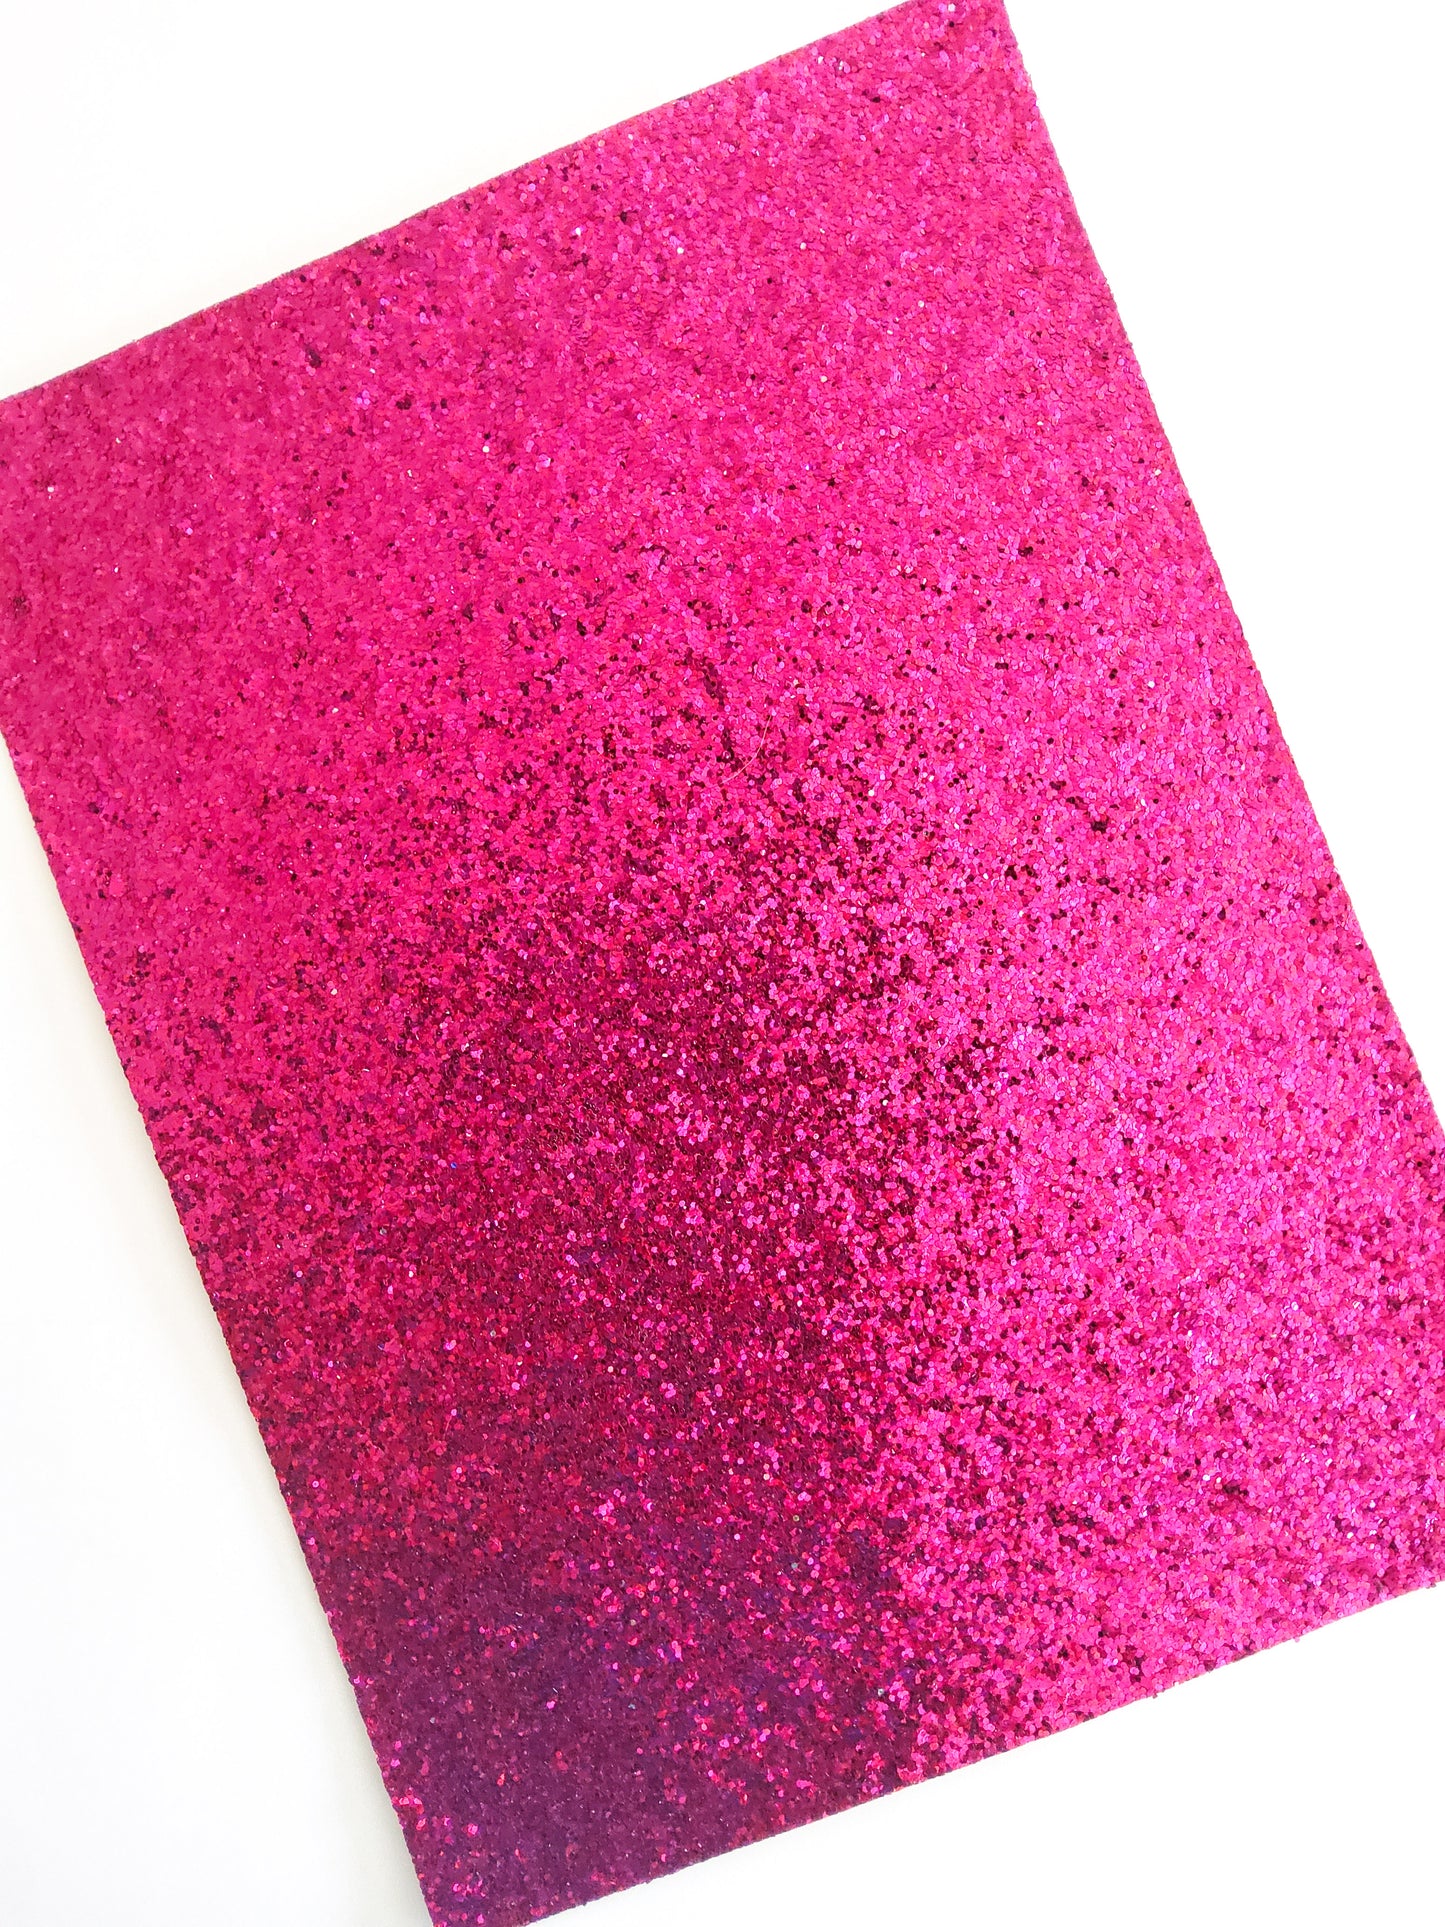 Hot Pink Chunky Glitter 9x12 thin faux leather sheet